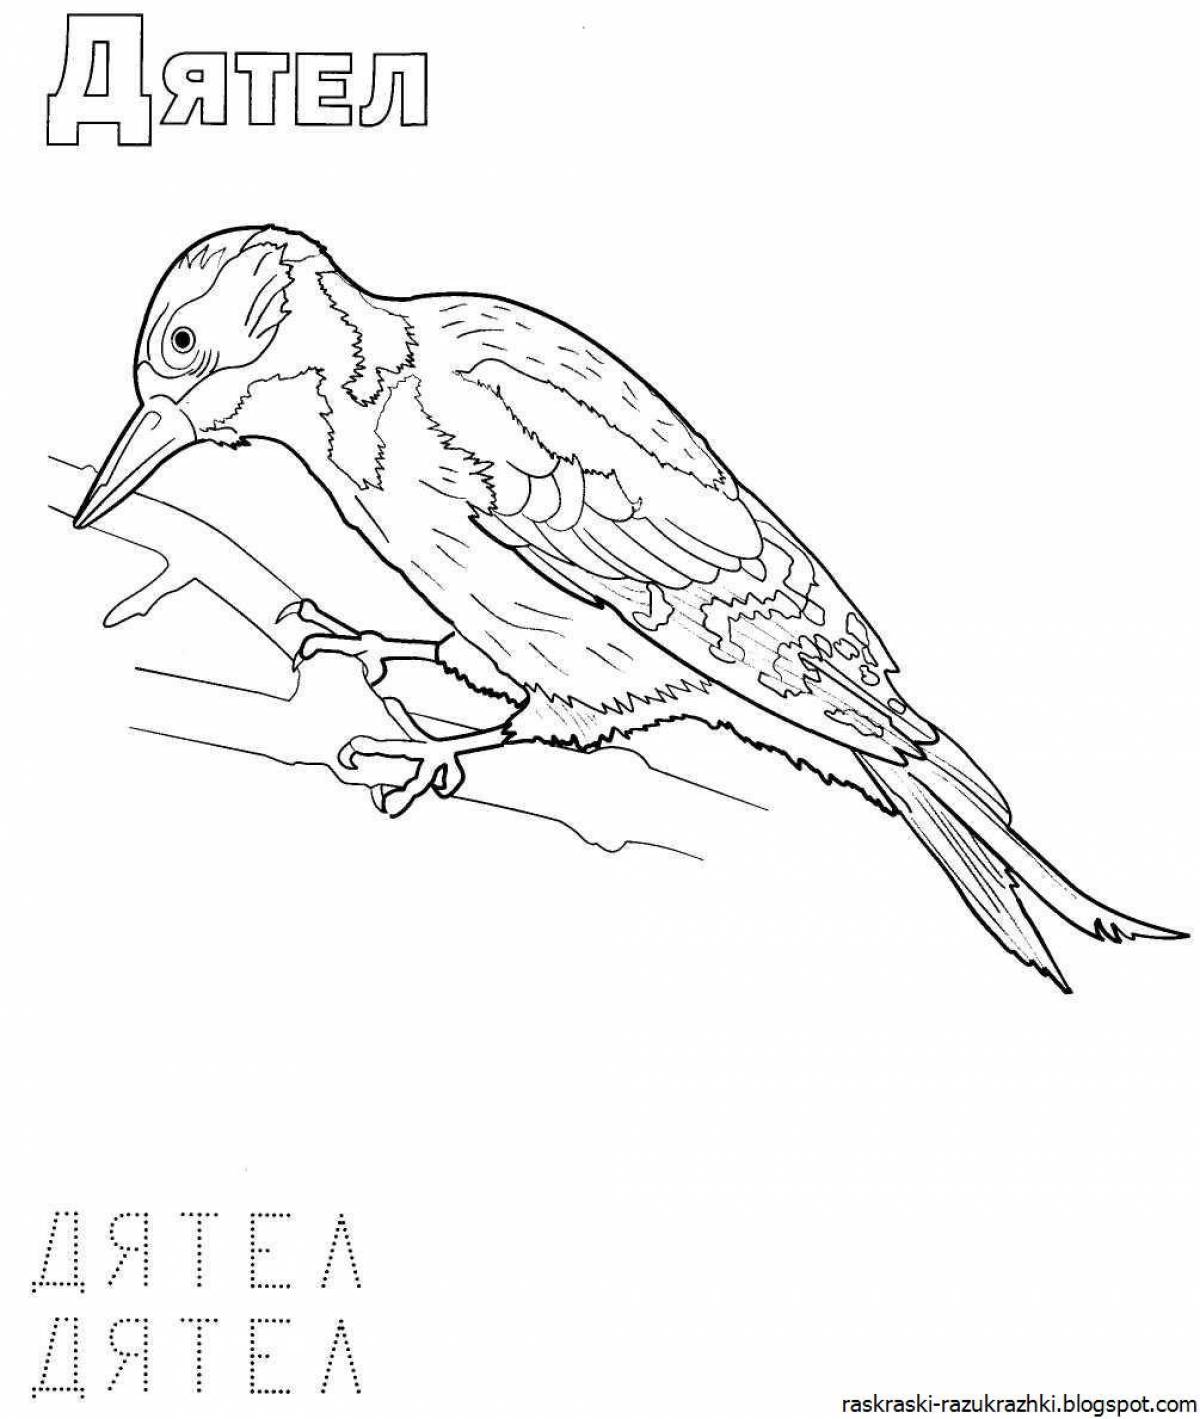 Coloring pages of wintering birds for children 3-4 years old